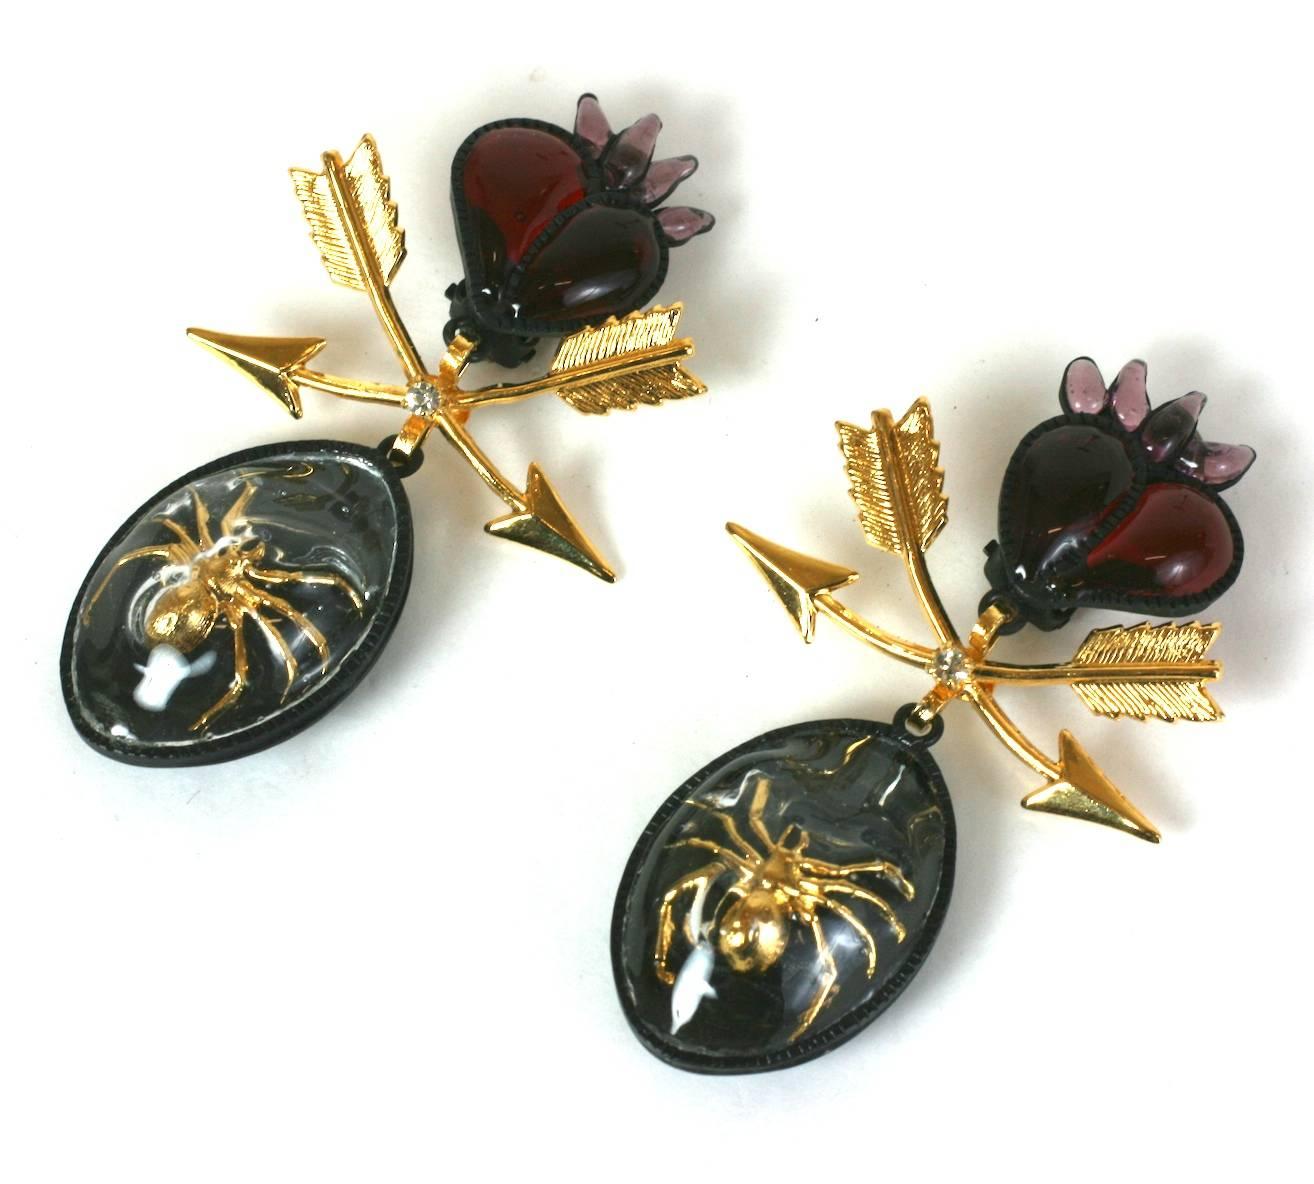 Long flaming Sacred Heart Earrings with Antique overtones in a modern mash up of styles and periods. Poured glass hearts in ruby and amythest glass are paired with gilt arrows and a Georgian style caged spiders 